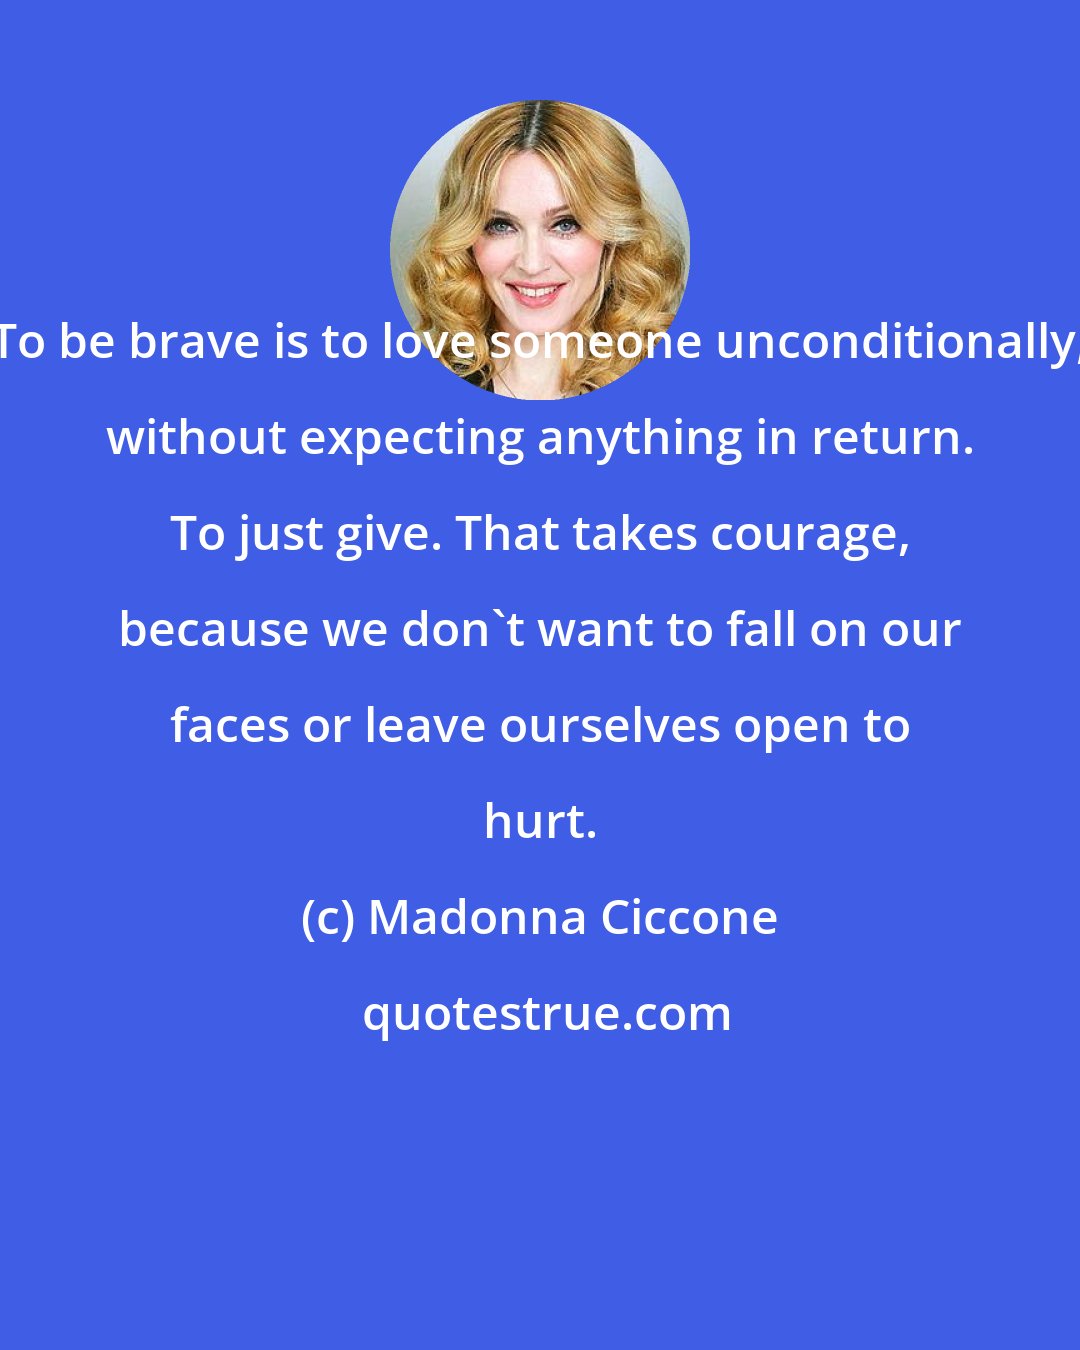 Madonna Ciccone: To be brave is to love someone unconditionally, without expecting anything in return. To just give. That takes courage, because we don't want to fall on our faces or leave ourselves open to hurt.